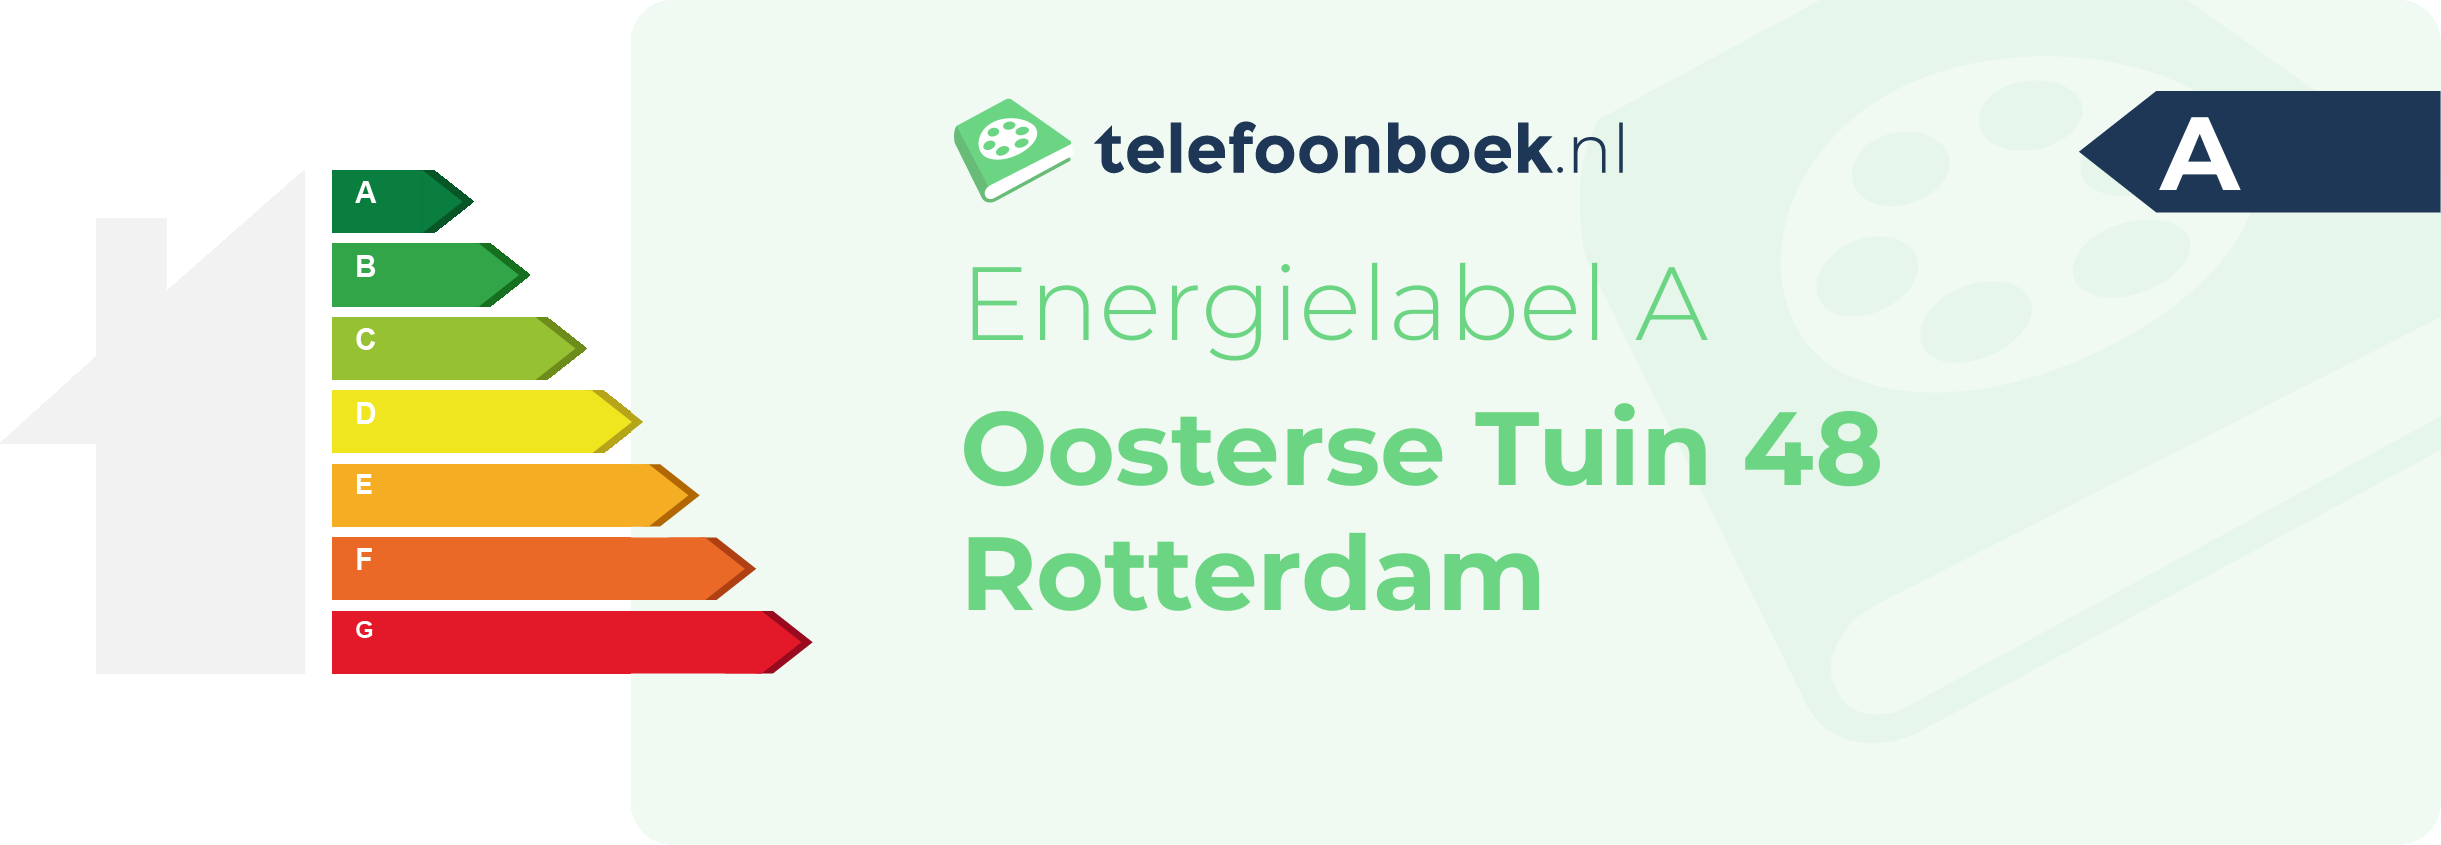 Energielabel Oosterse Tuin 48 Rotterdam